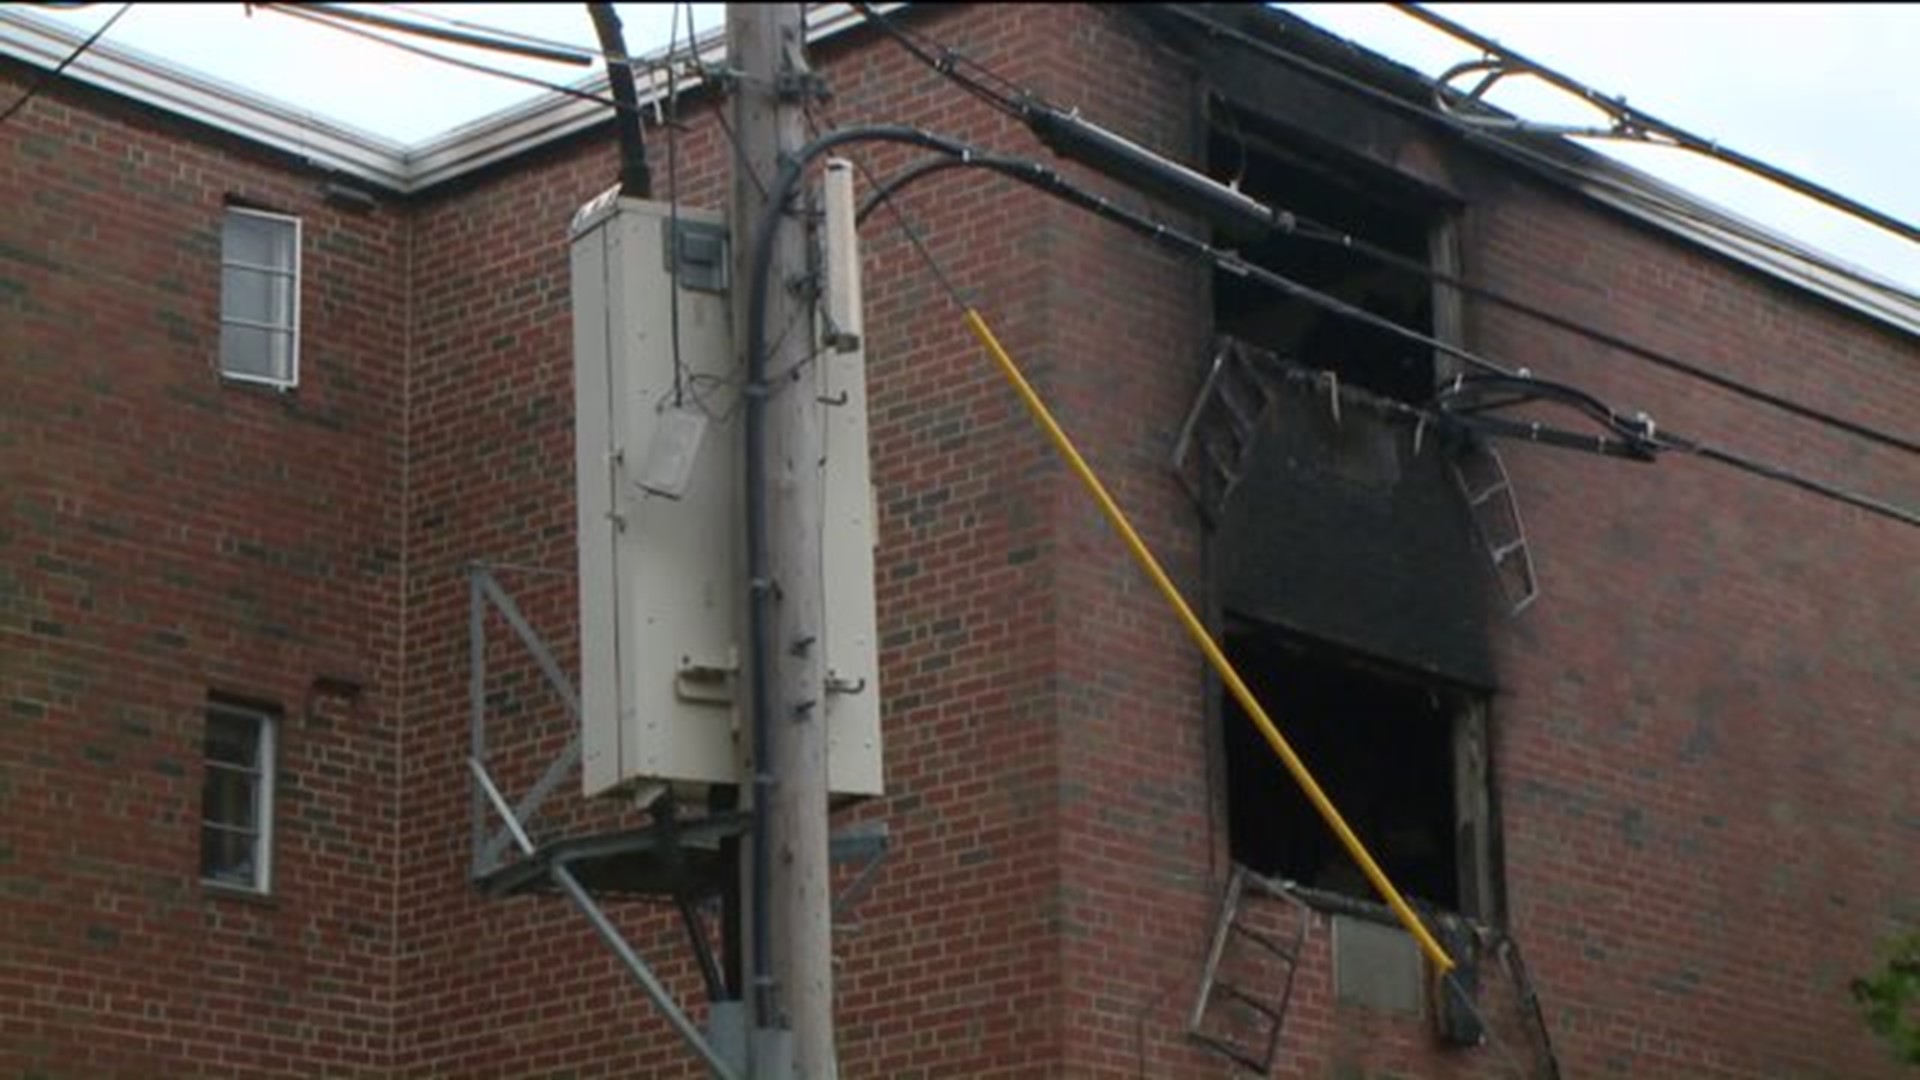 Victims of fire still living in hotels a month later